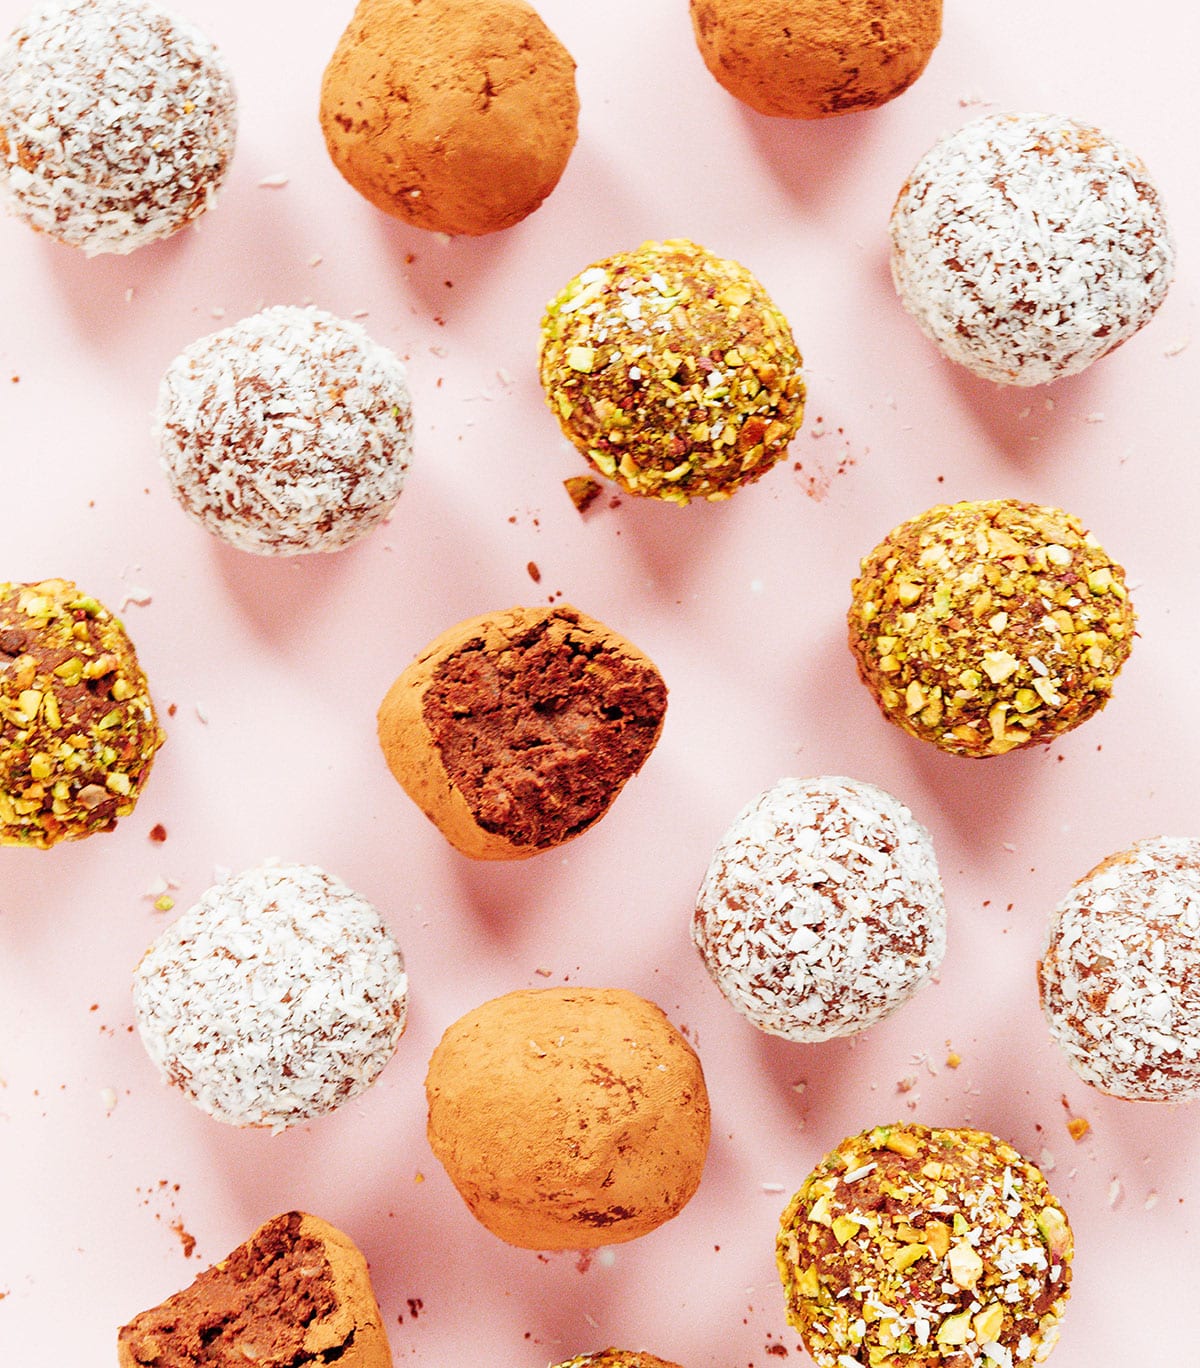 Differently colored truffles on a pink background